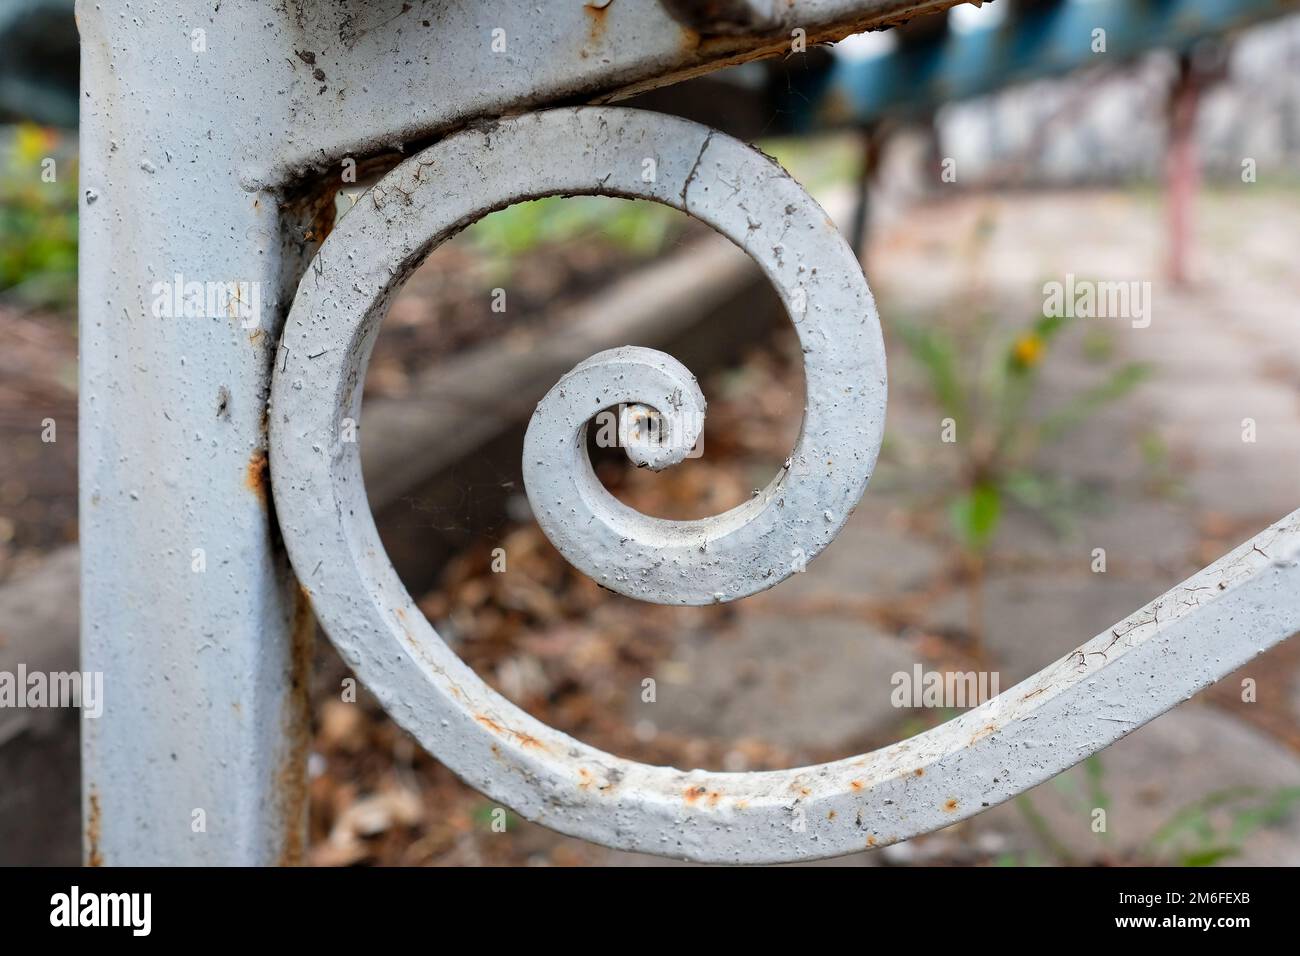 Iron curl, lower part of the bench. No people Stock Photo